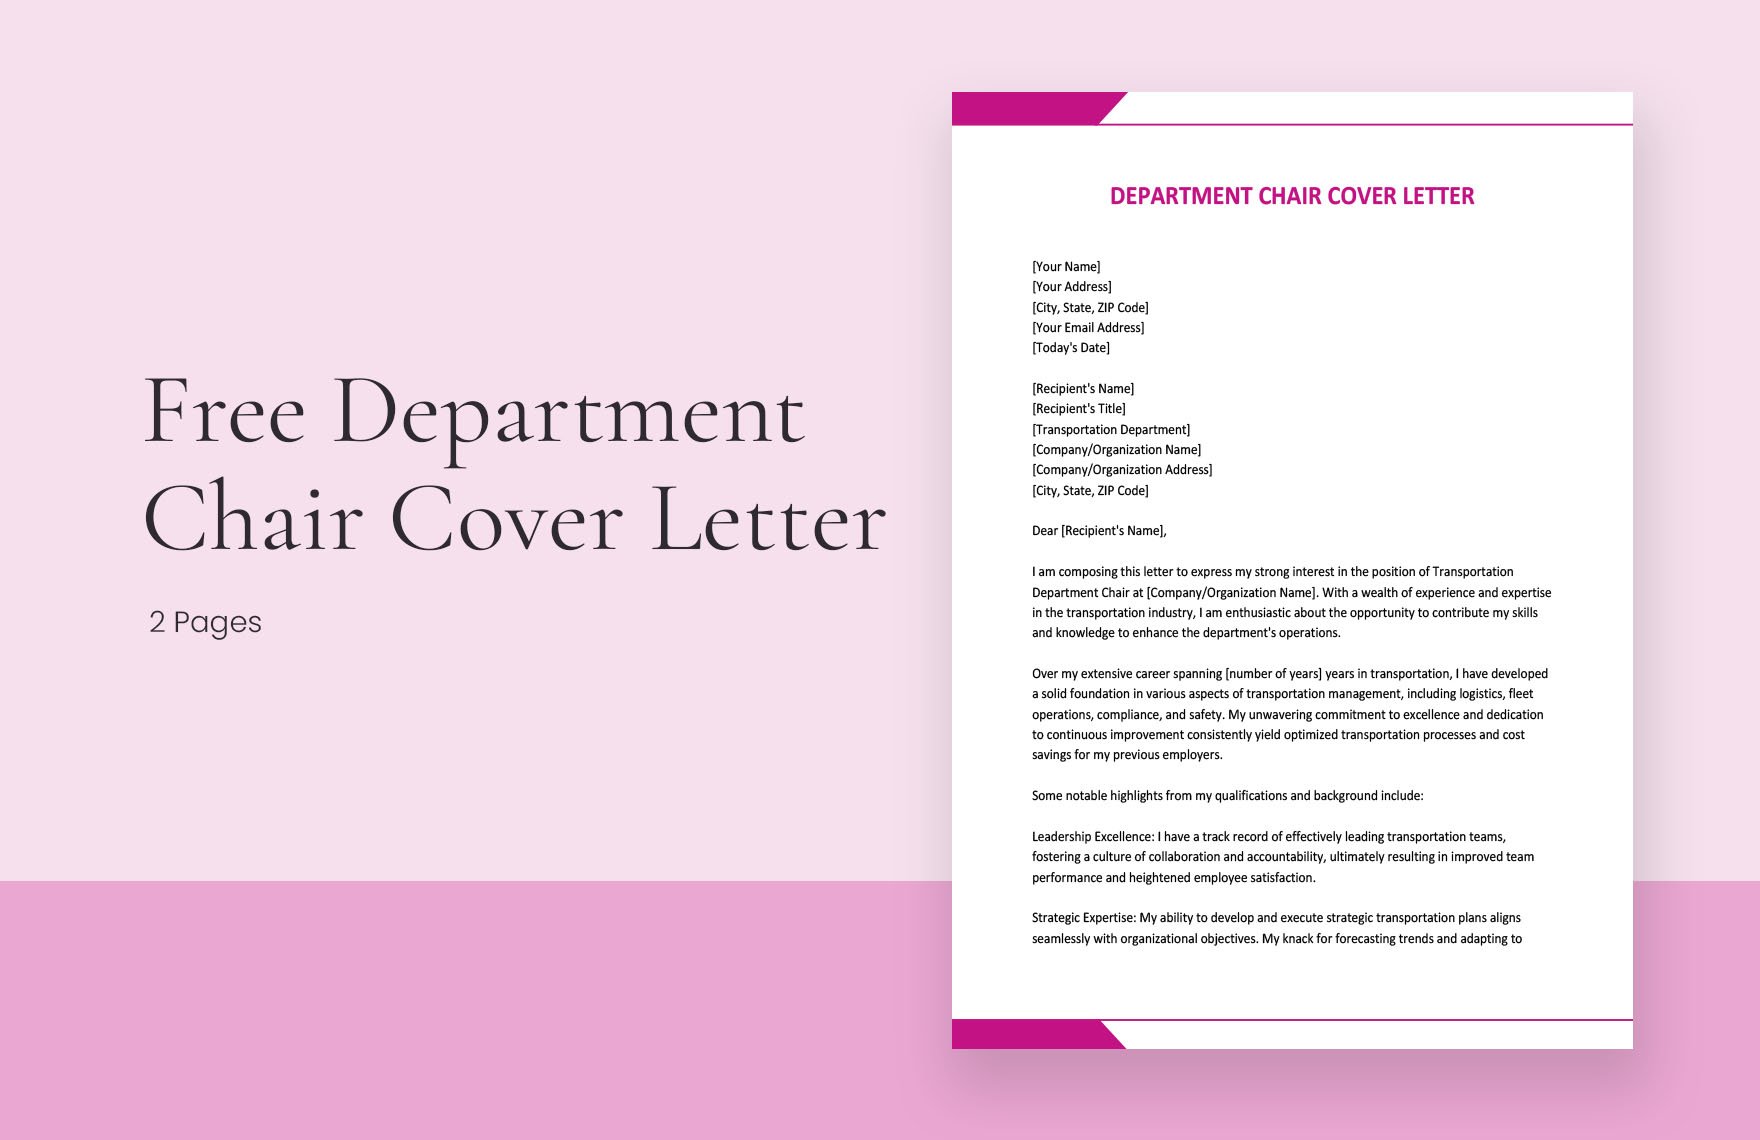 Department Chair Cover Letter in Word, Google Docs